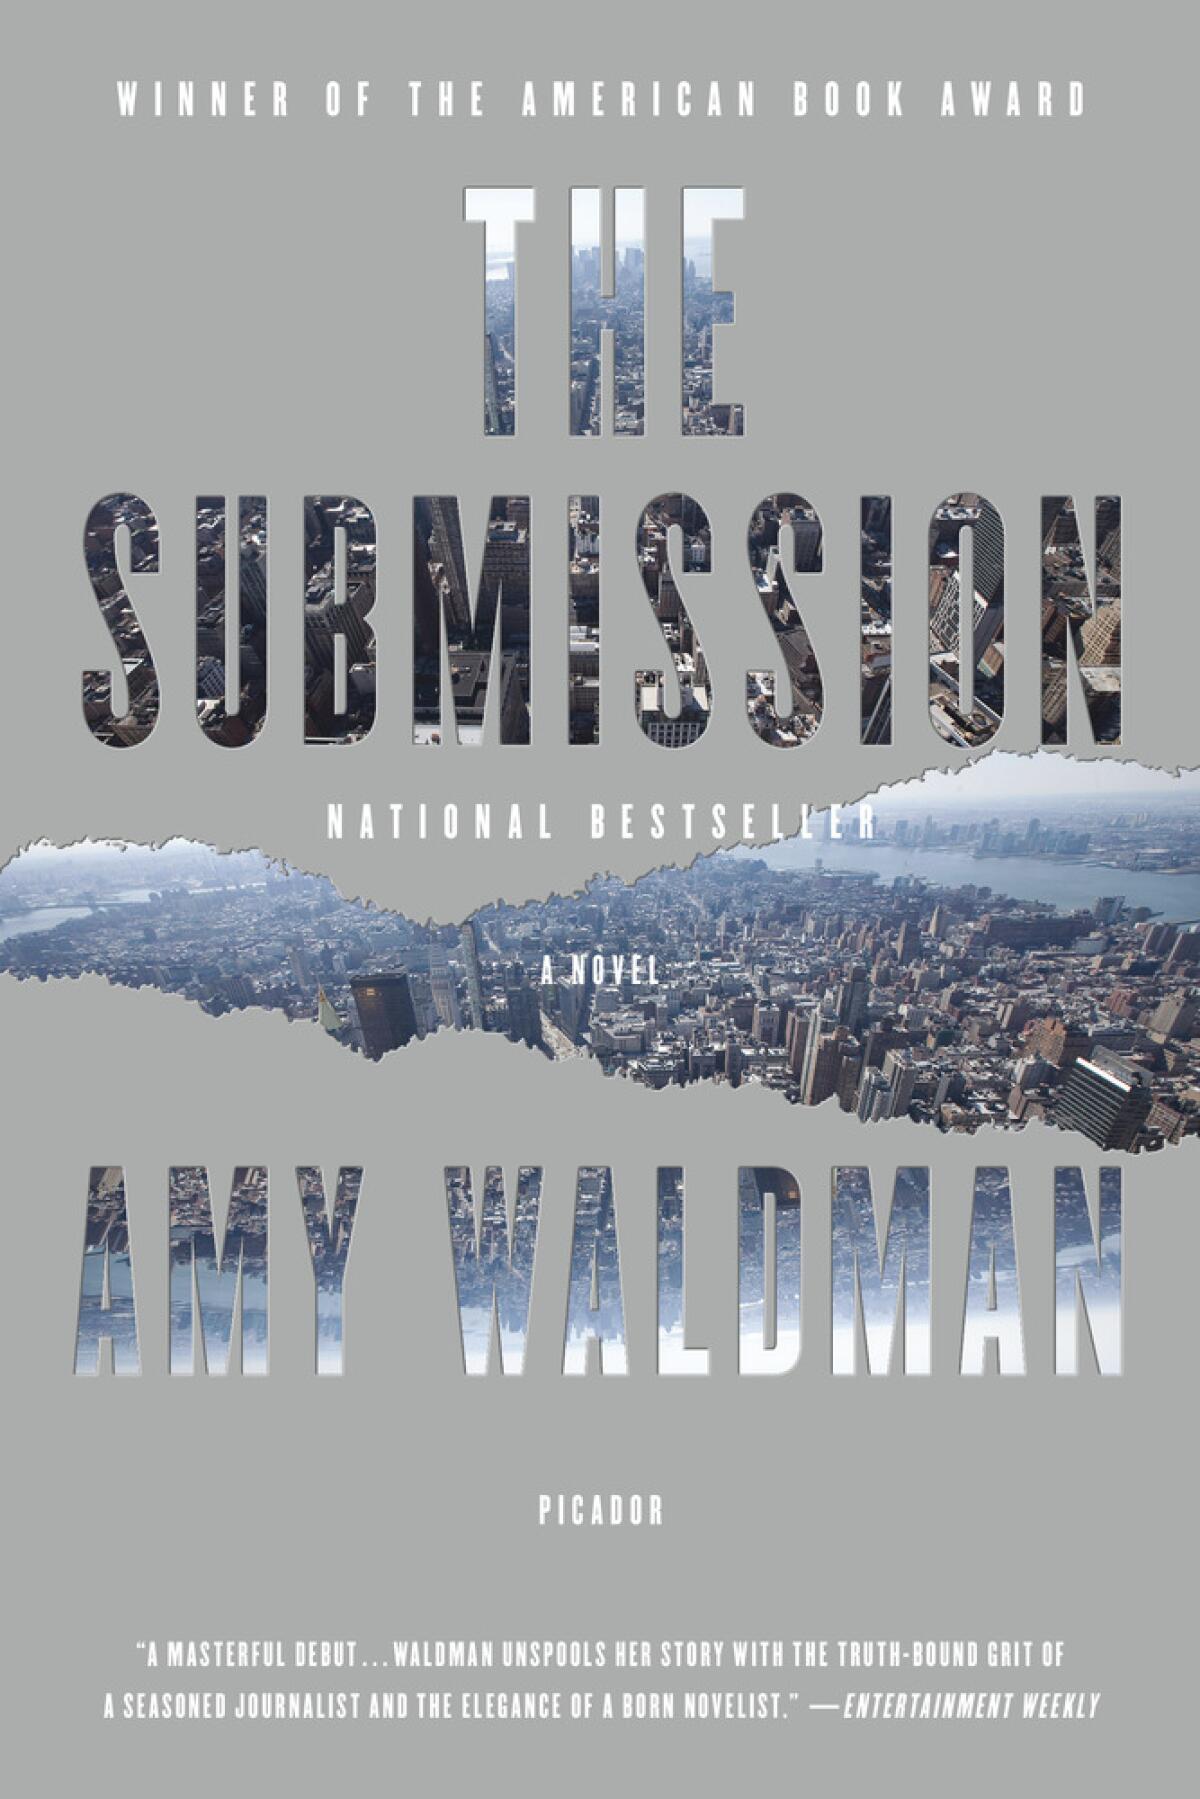 Book jacket for "The Submission" by Amy Waldman.